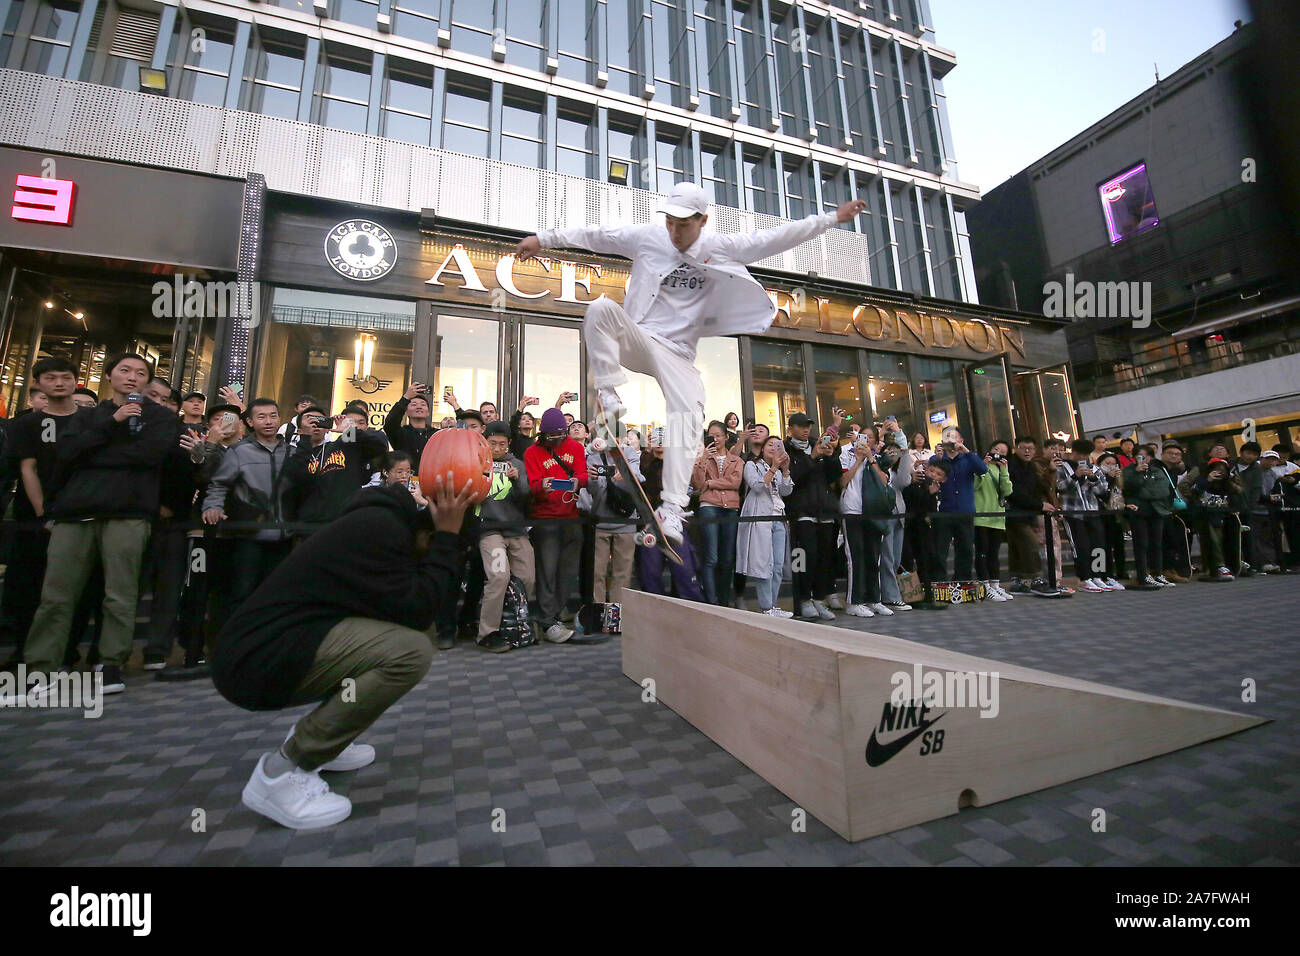 Beijing, China. 02nd Nov, 2019. A Chinese skate boarder, sponsored by Nike  to promote its new line of shoes, performs stunts in front of a crowd at an  international shopping mall in